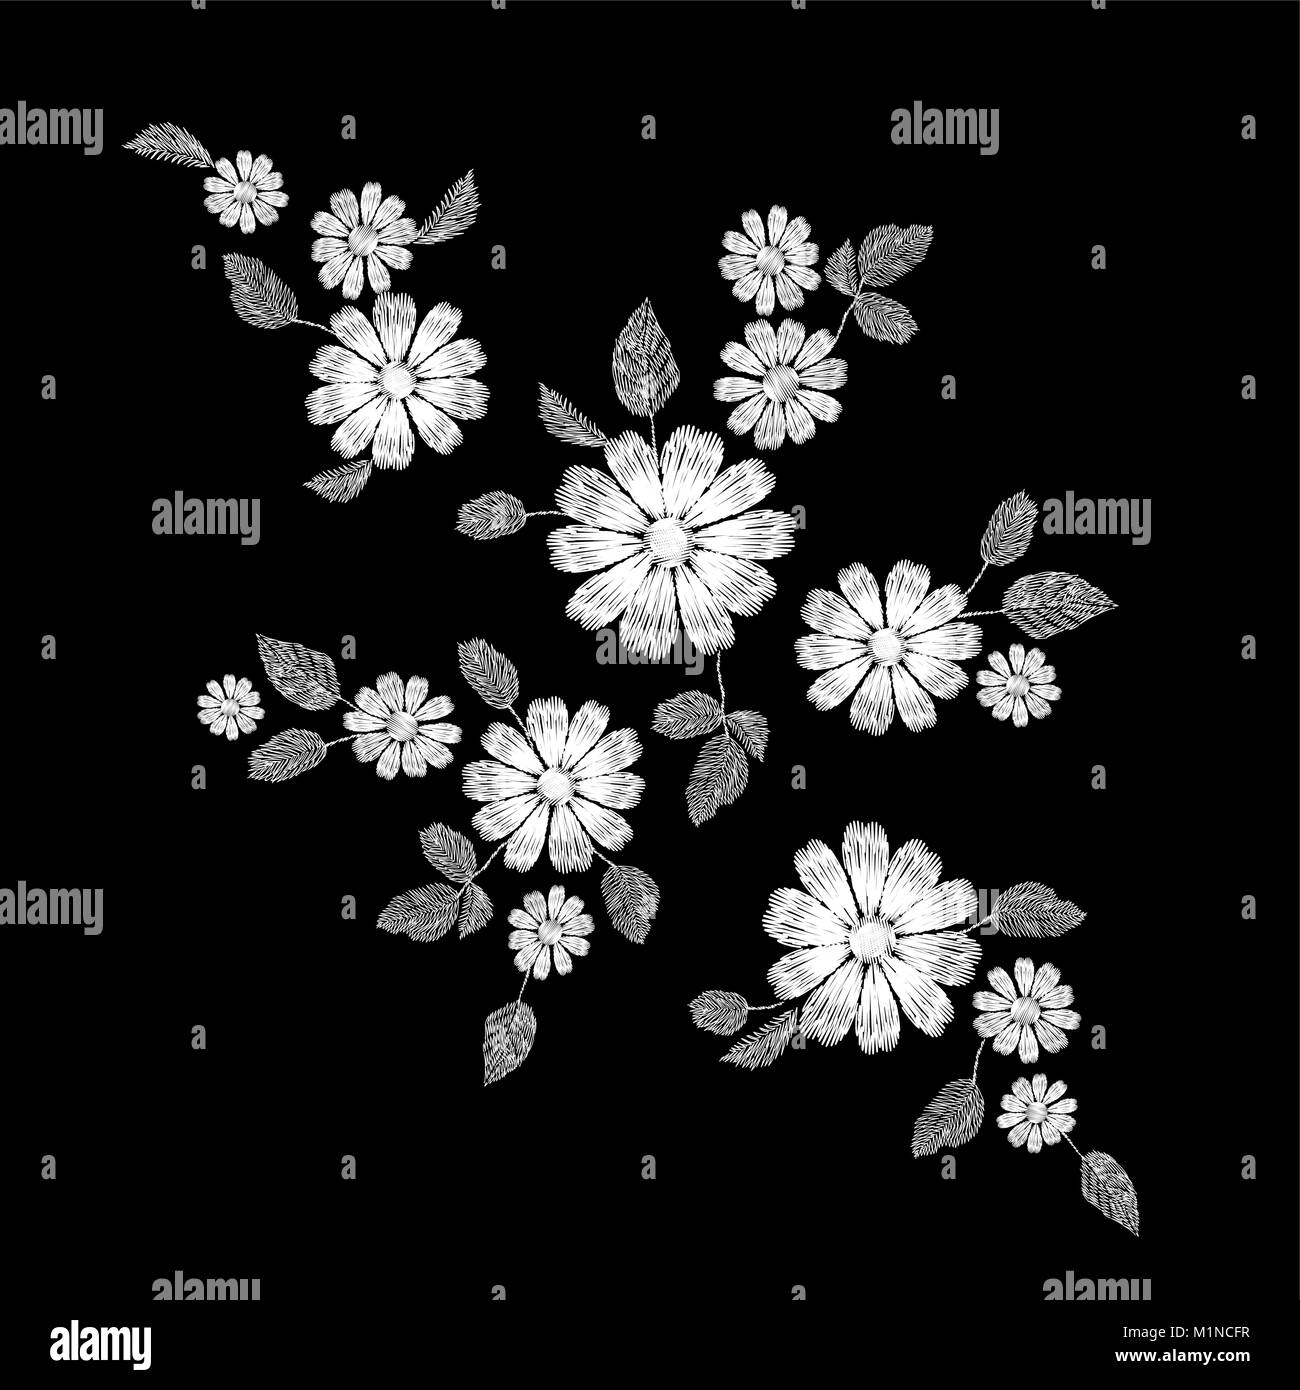 White lace flower embroidery patch. Fashion decoration stitched texture template. Ethnic traditional daisy field plant leaves textile print design vector illustration Stock Vector